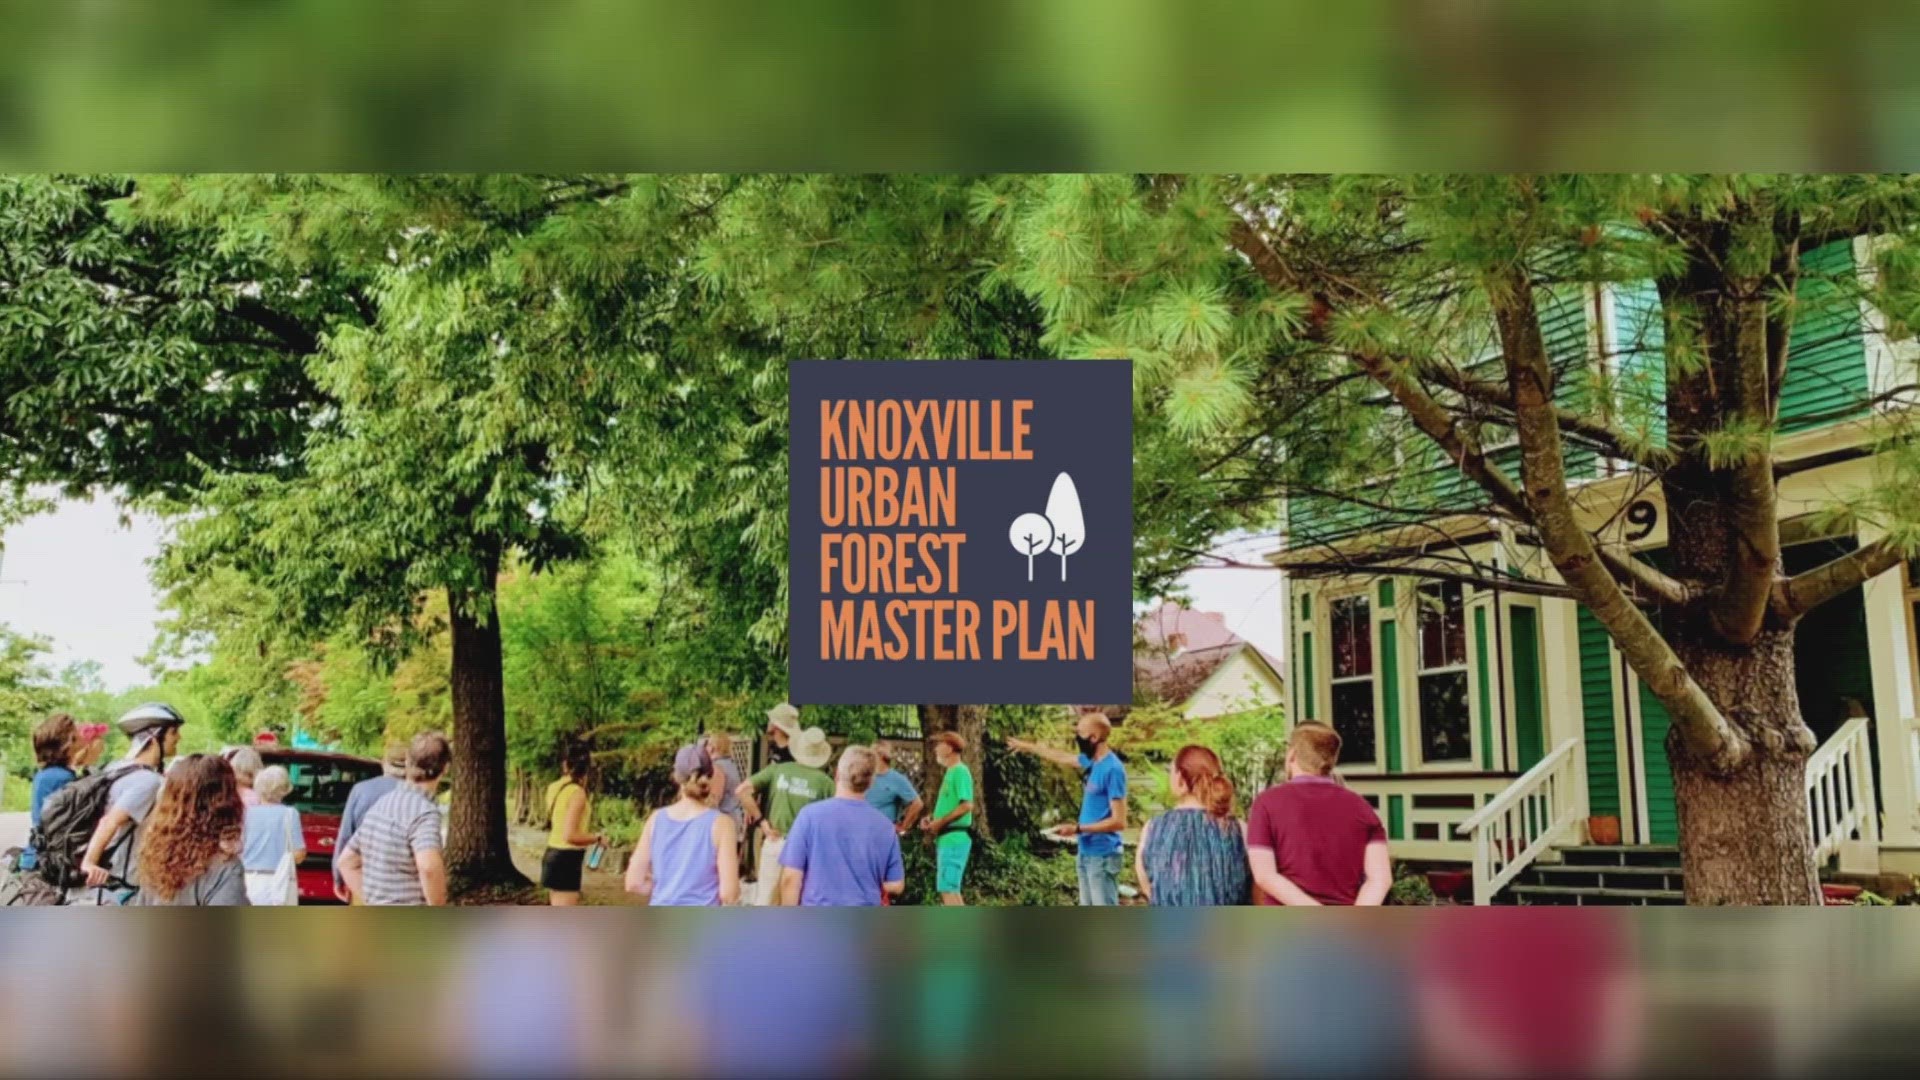 Around $1.7 million in federal grant money will help Knoxville plant more trees.